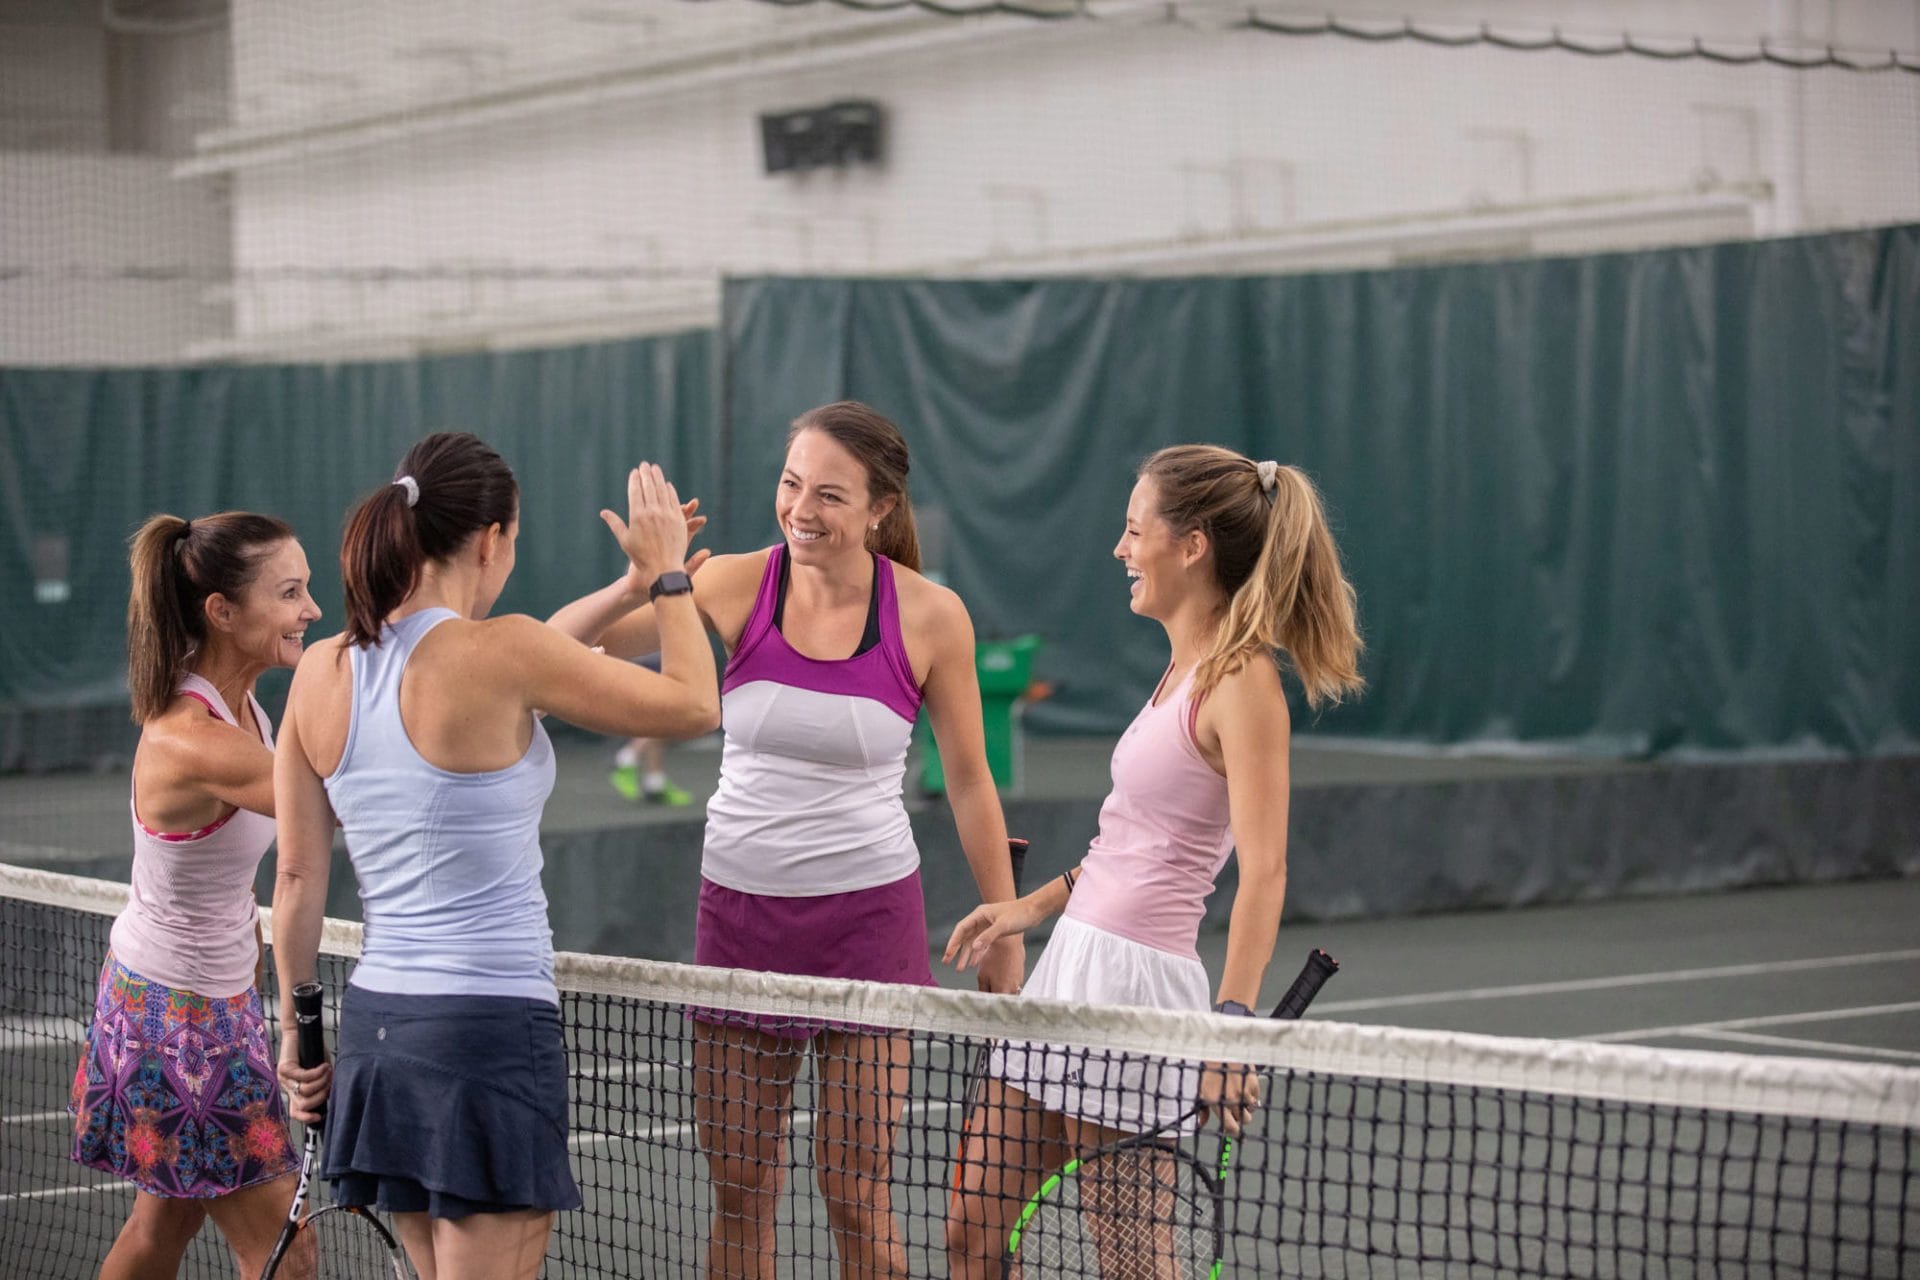 women high five at a tennis net after playing a match on Club Greenwood indoor clay courts